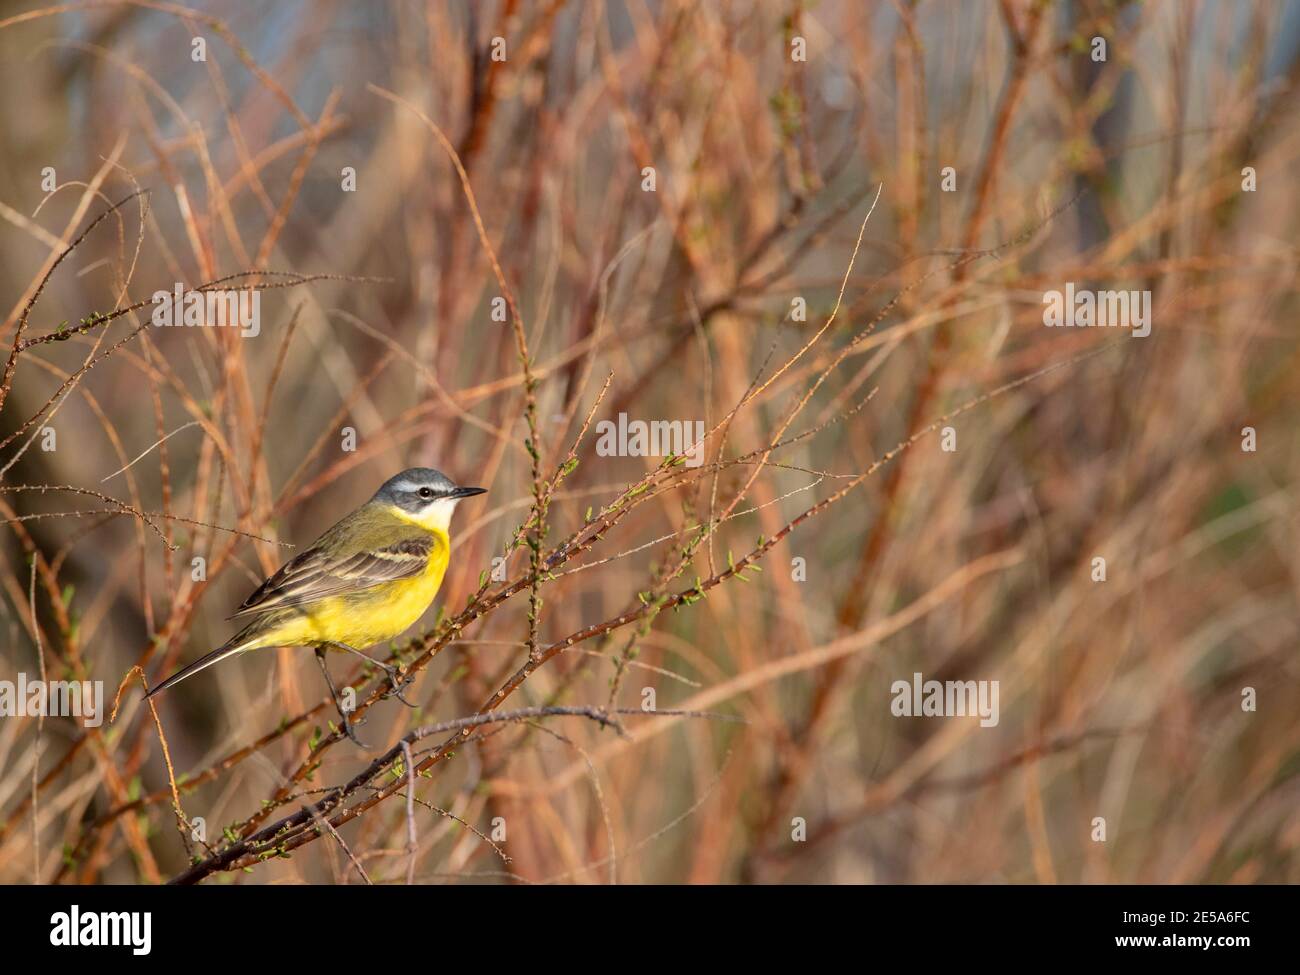 Yellow wagtail, Iberian wagtail, Spanish Wagtail (Motacilla flava iberiae, Motacilla iberiae), male perched on a twig, Spain Stock Photo